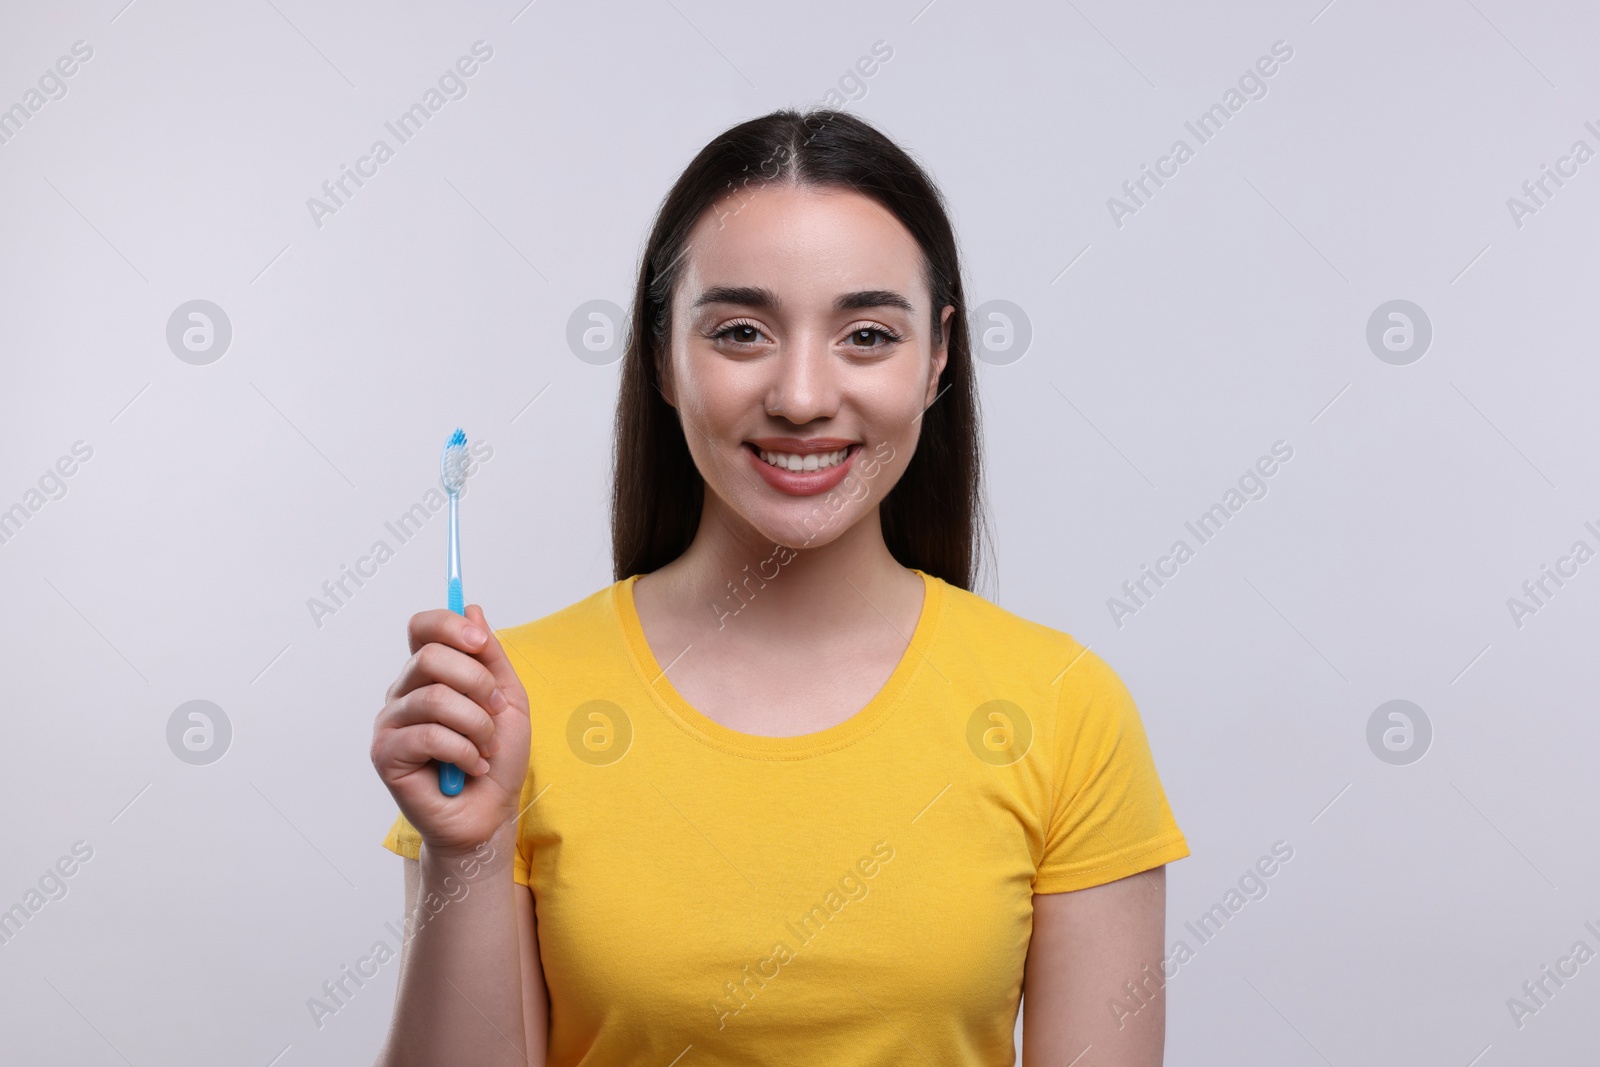 Photo of Happy young woman holding plastic toothbrush on white background